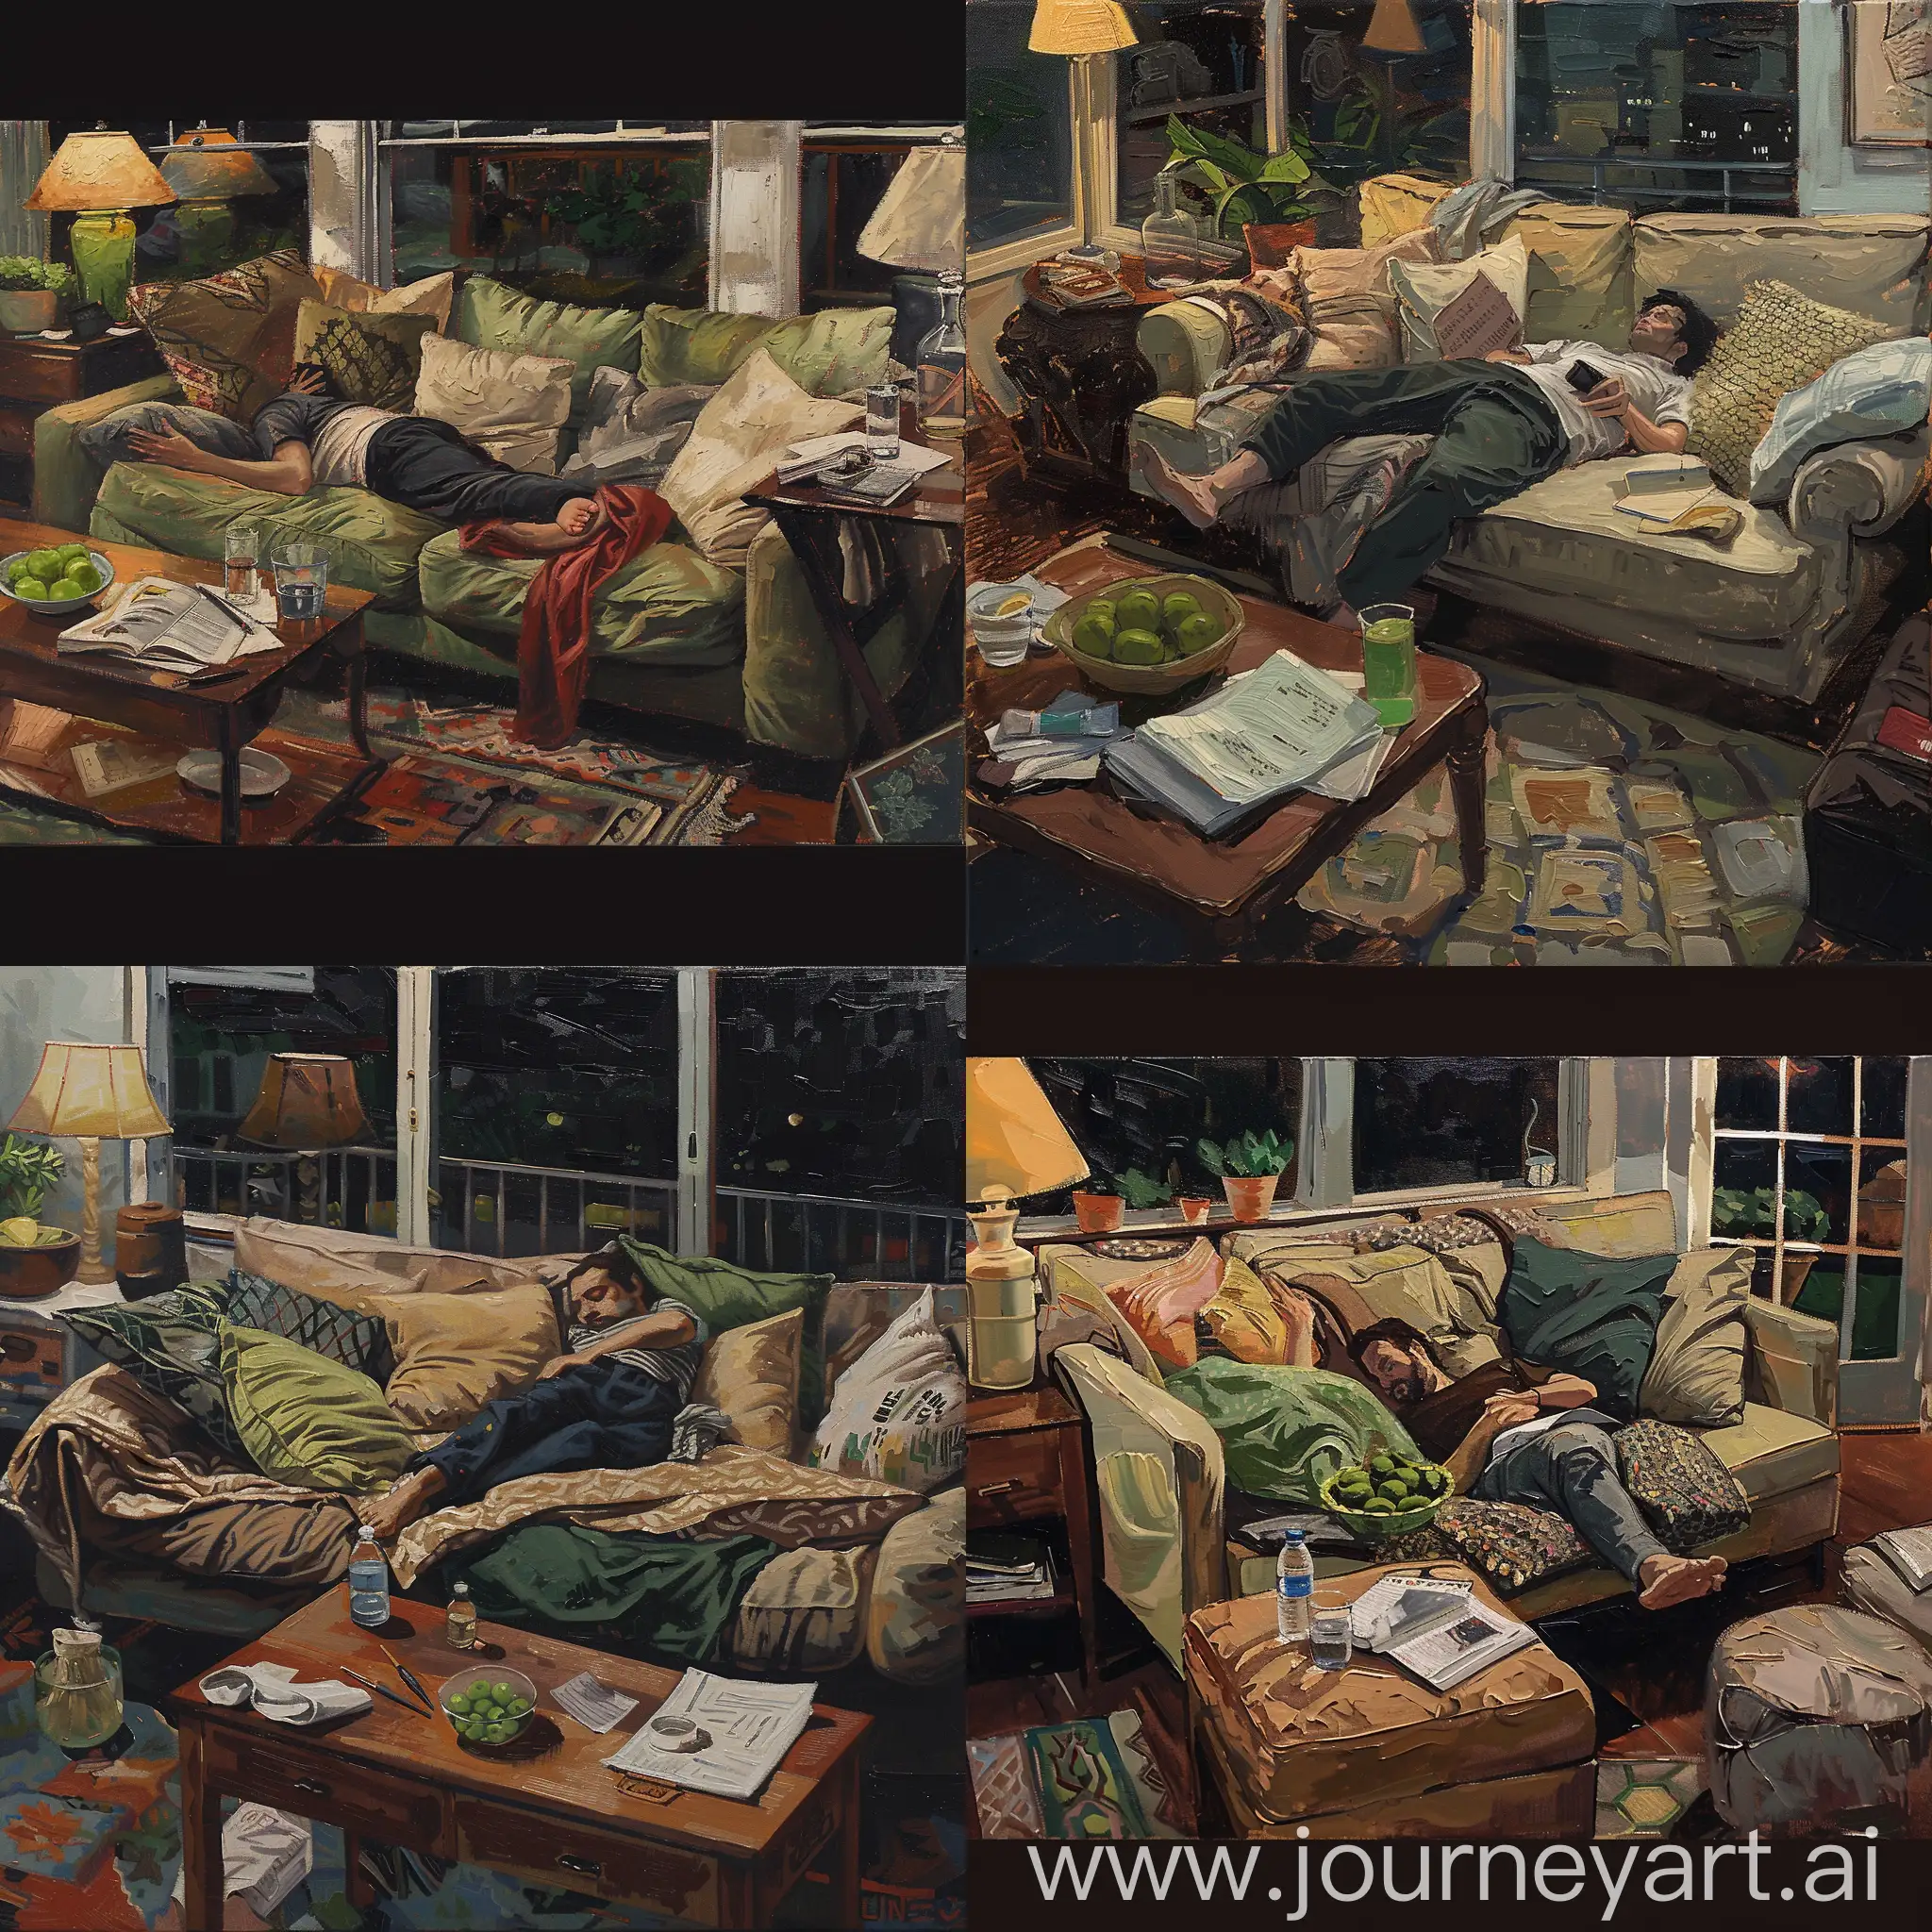 Cozy-Nighttime-Scene-Relaxing-on-the-Couch-with-Earthy-Tones